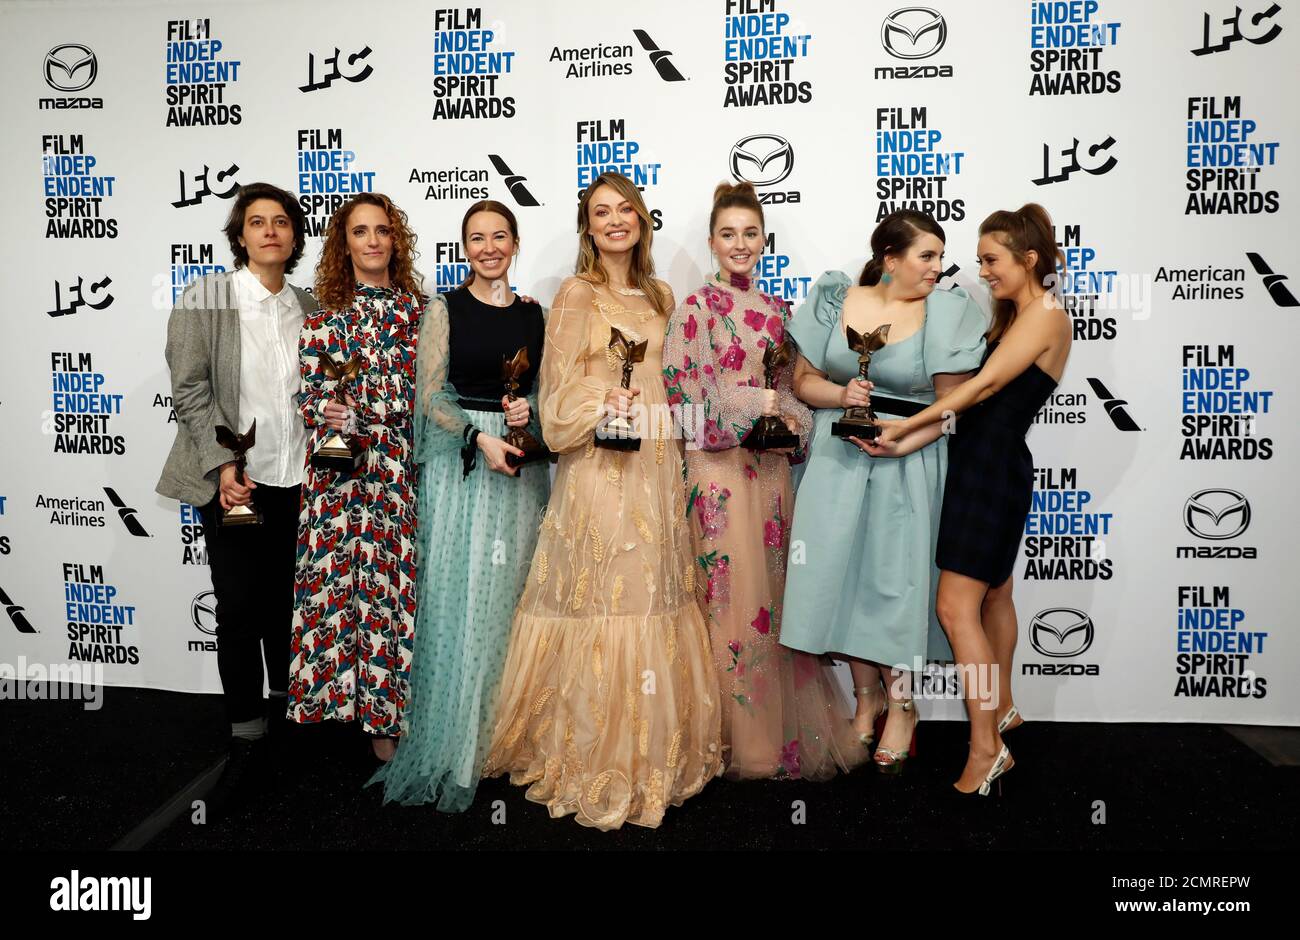 35th Film Independent Spirit Awards - Photo Room - Santa Monica, California, U.S., February 8, 2020 - The cast and crew of 'Booksmart' pose backstage with their Best First Feature award. REUTERS/Lucas Jackson Stock Photo